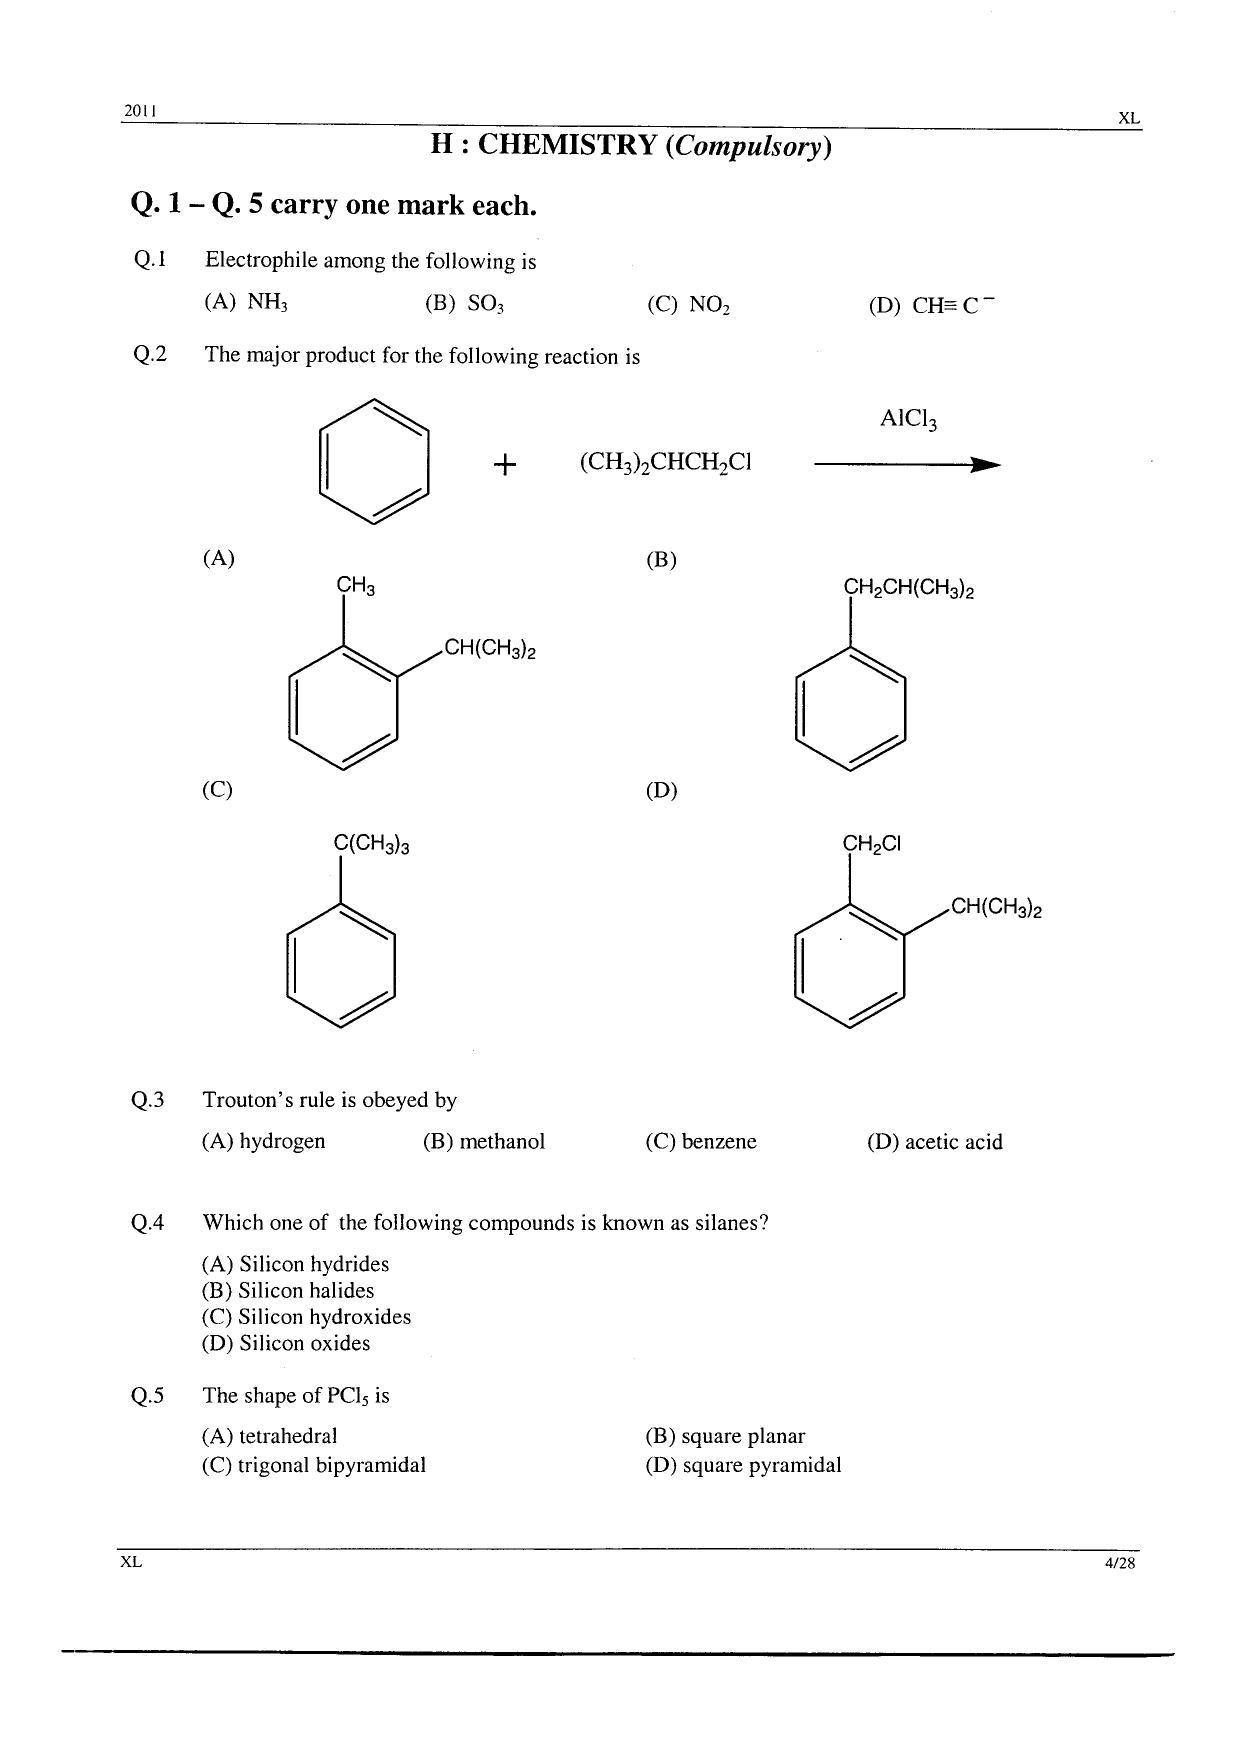 GATE 2011 Life Sciences (XL) Question Paper with Answer Key - Page 4